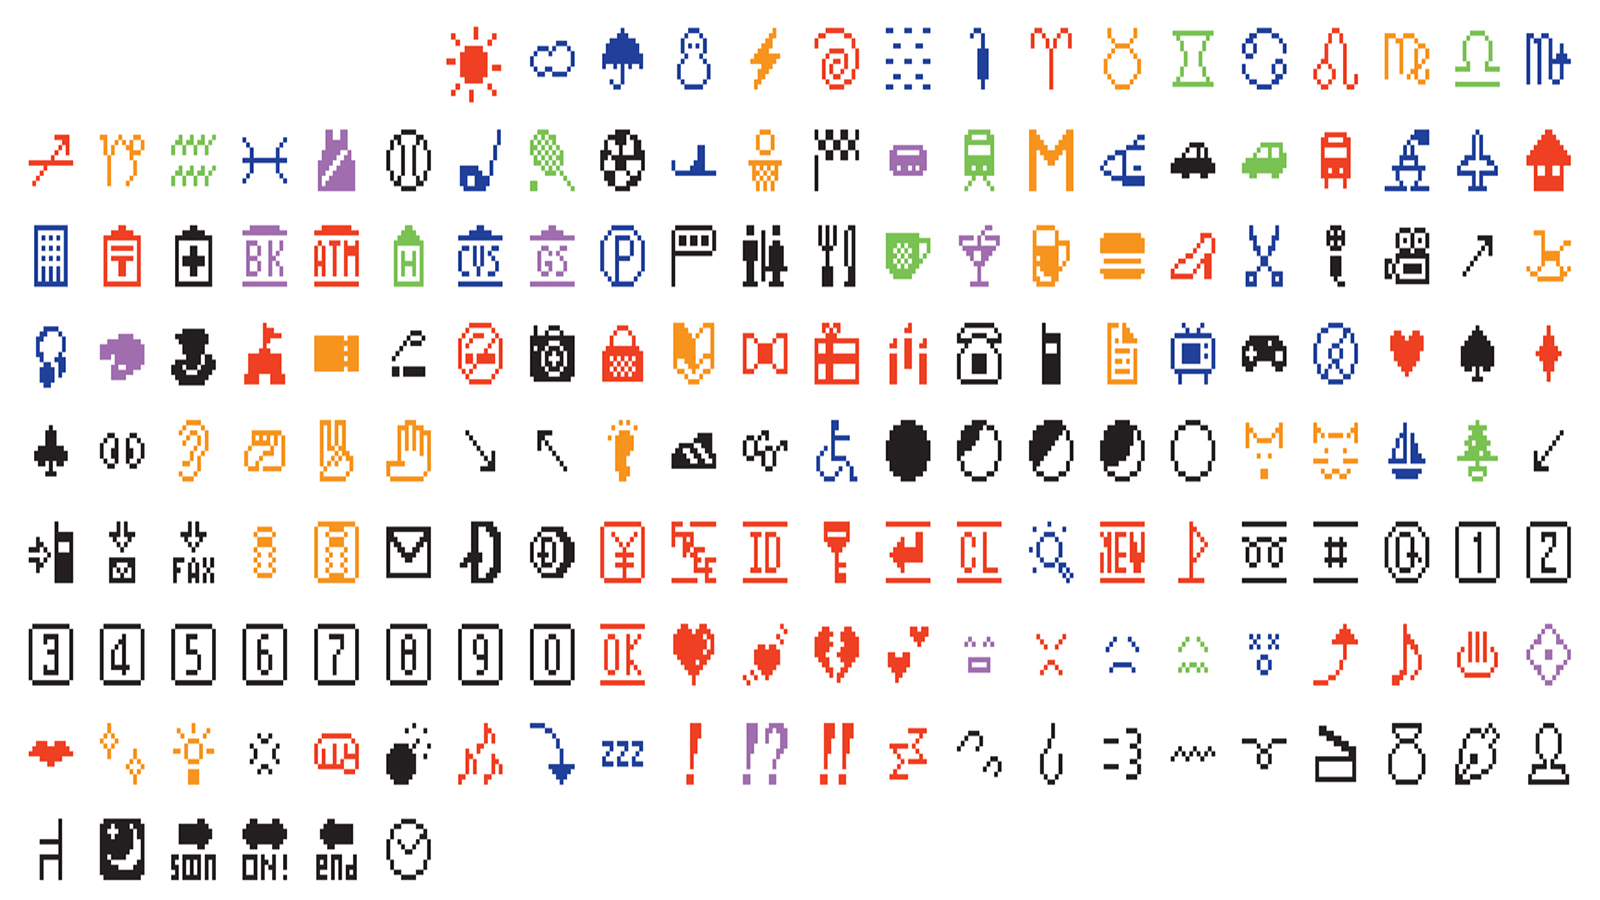 A collection of pixelated images. Many are recognizable as the emojis we have today, including some like the astrological symbols, road signs, and a few food items.